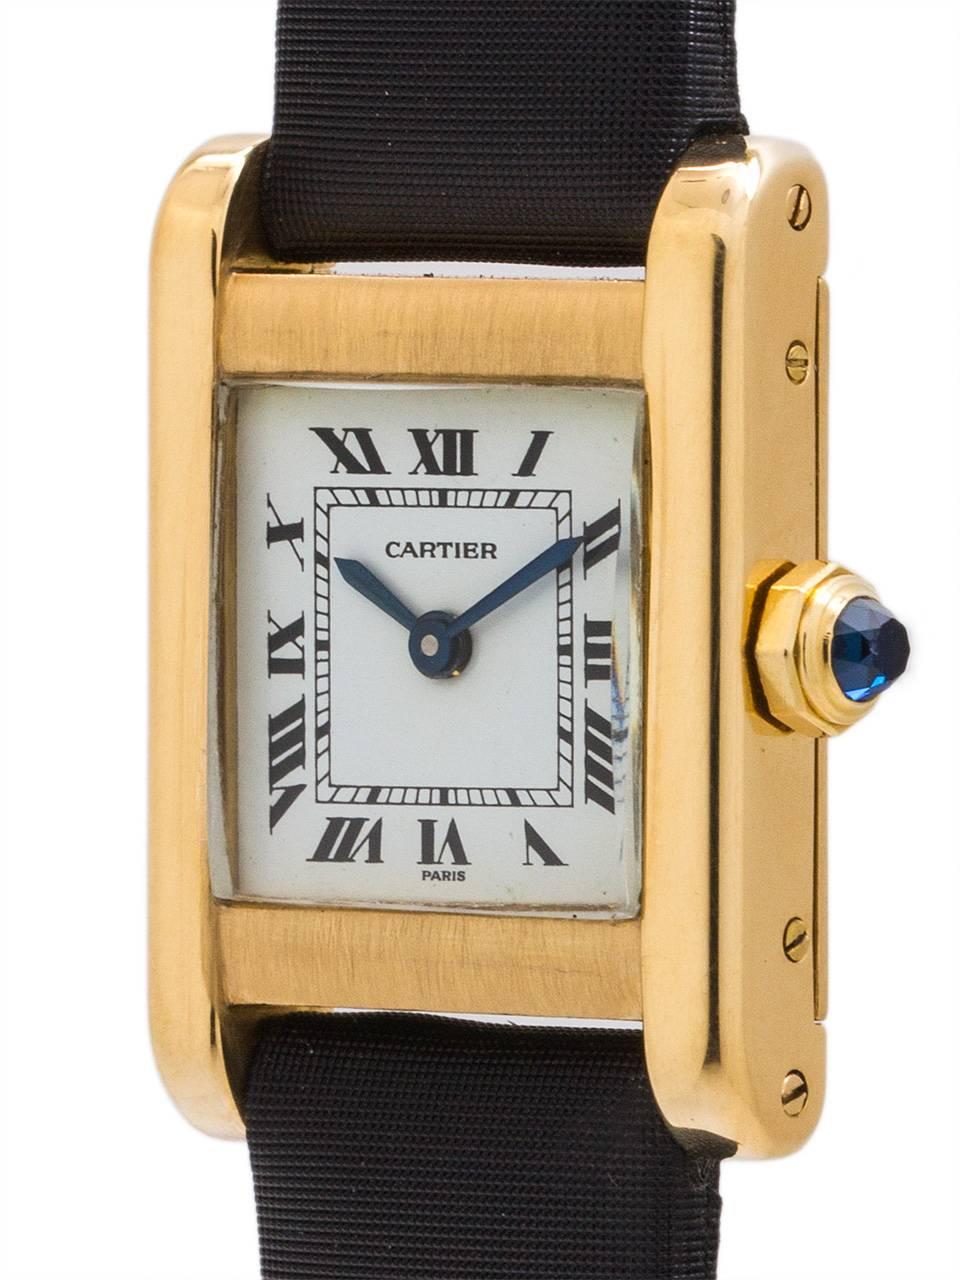 
Cartier Lady’s 18K Gold Tank “Normale” circa 1970’s. Featuring 22 X 30mm rectangular case secured by 4 case screws. Featuring classic white enamel dial with printed black Roman numerals and blued steel hands and signed SWISS. Powered by 17 jewel